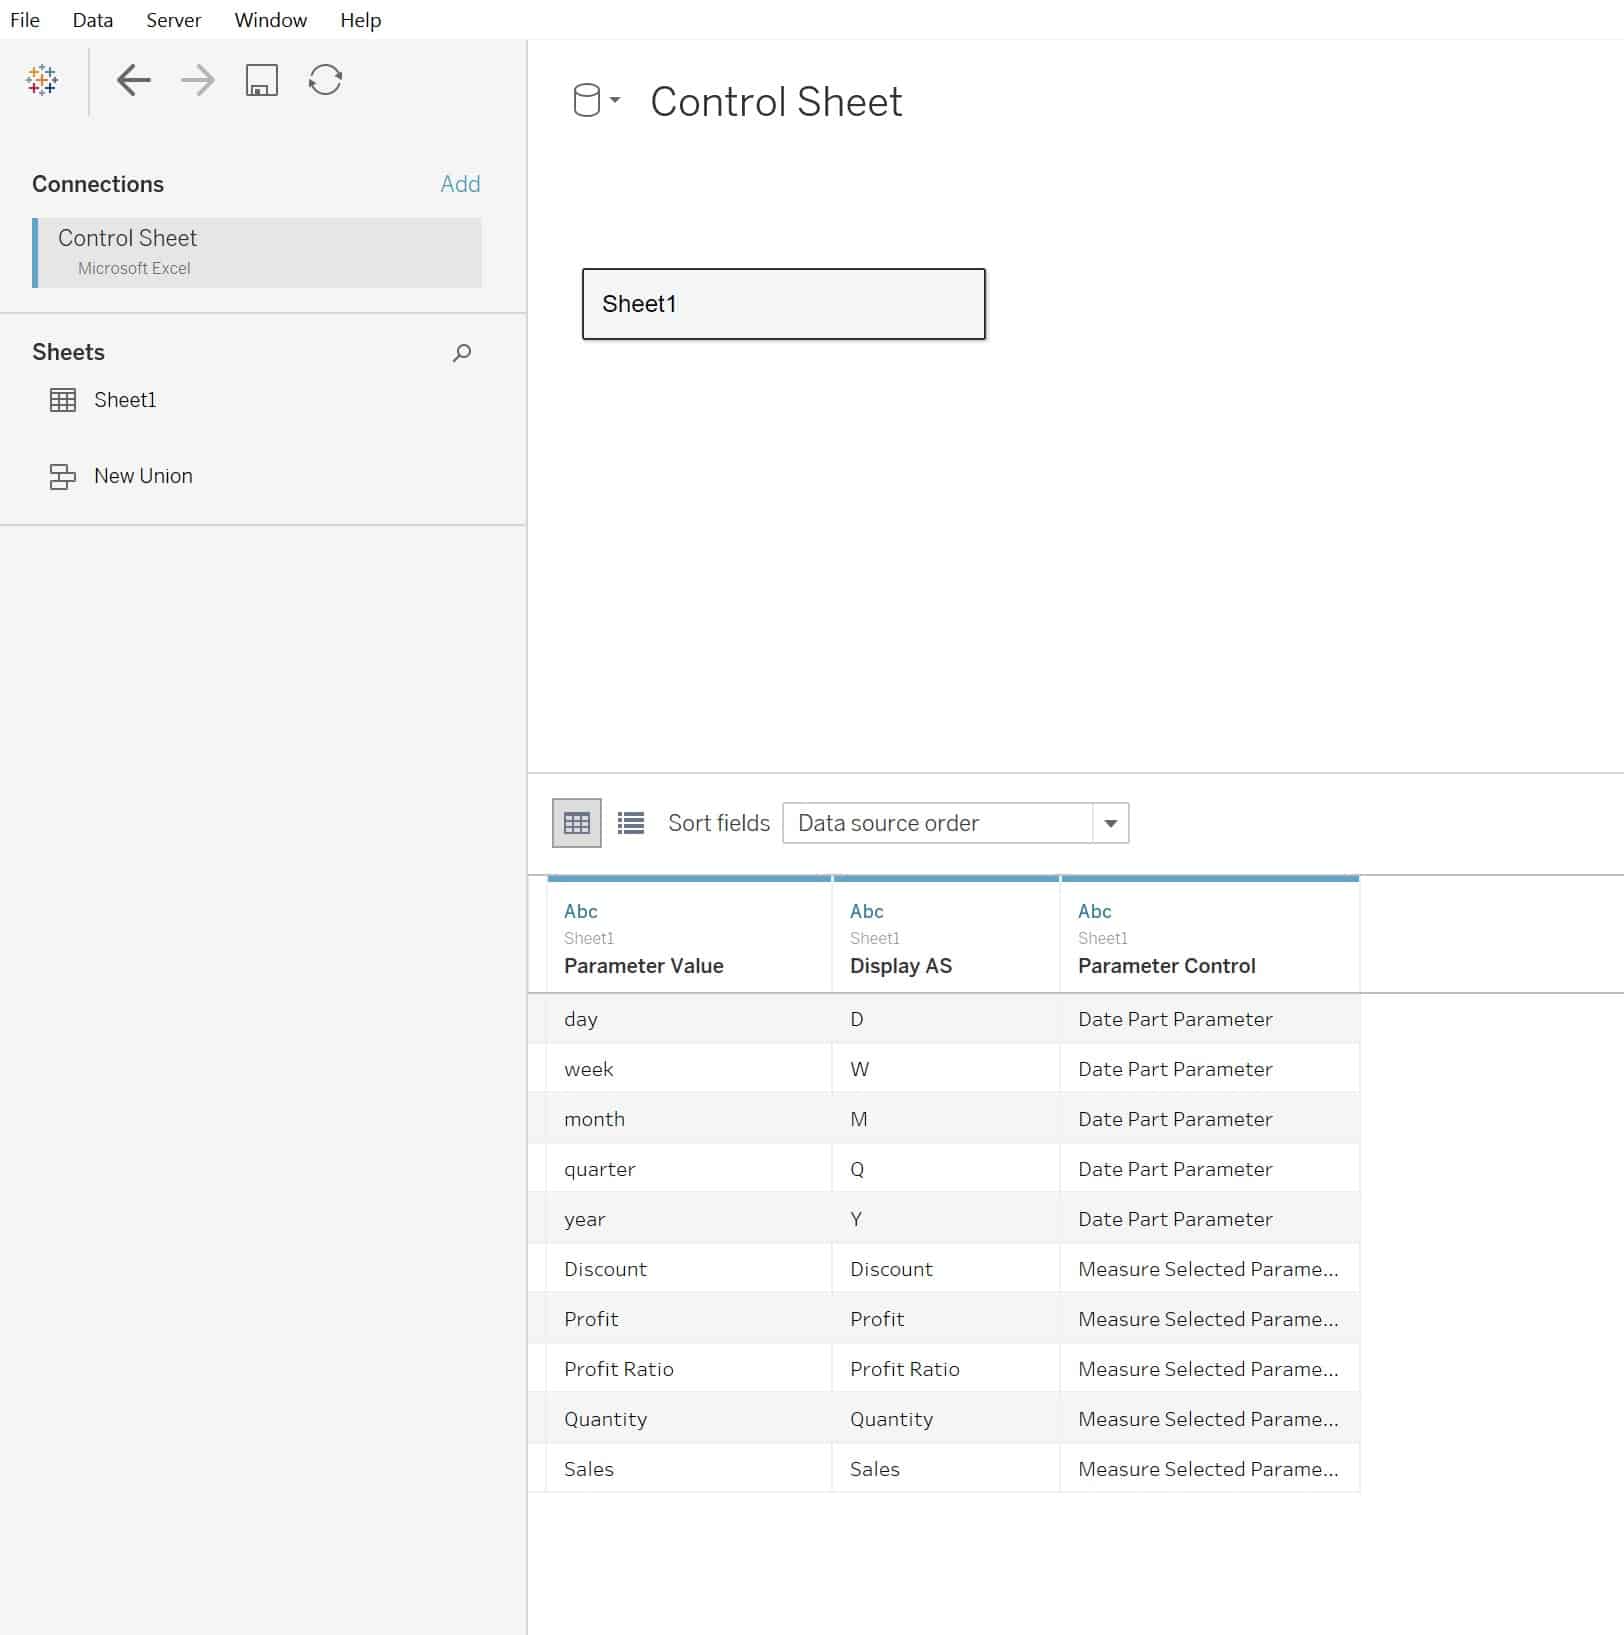 Add the Control Sheet to the Data connection in Tableau